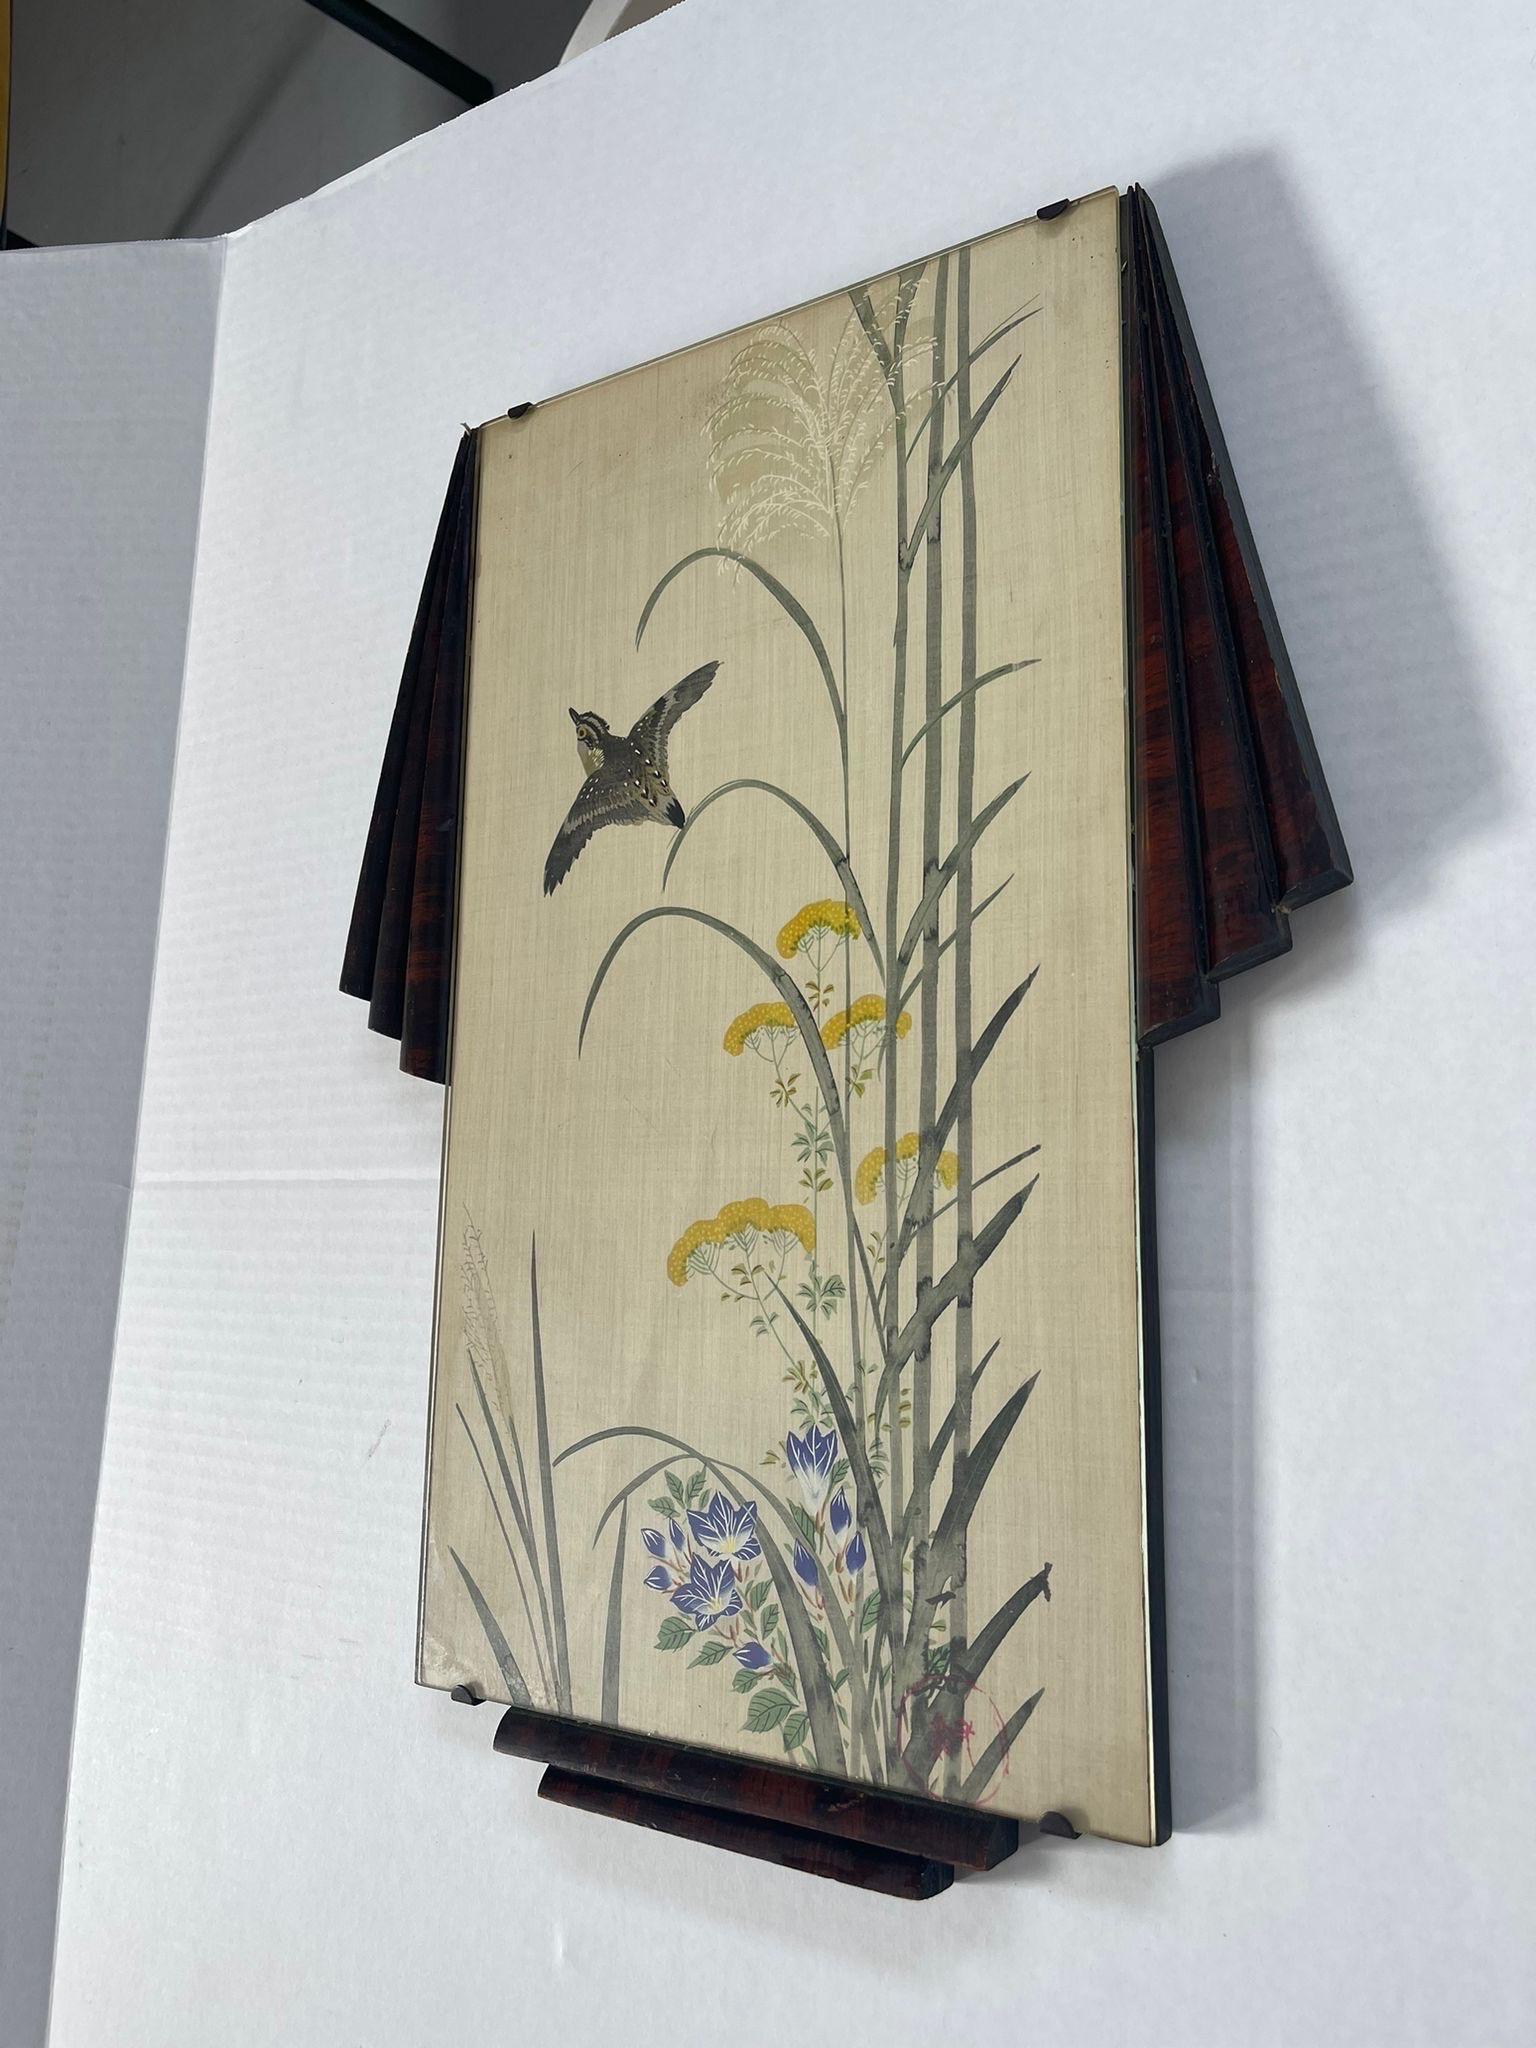 Painting Features Grey Bird Flying Through Yellow and Blue Flowers. Possibly 30s with Vintage Hardware.Tag Reads Painting on Silk. Vintage Condition Consistent with Age.

Dimensions. 13 W ; 1 D ; 18 1/2H